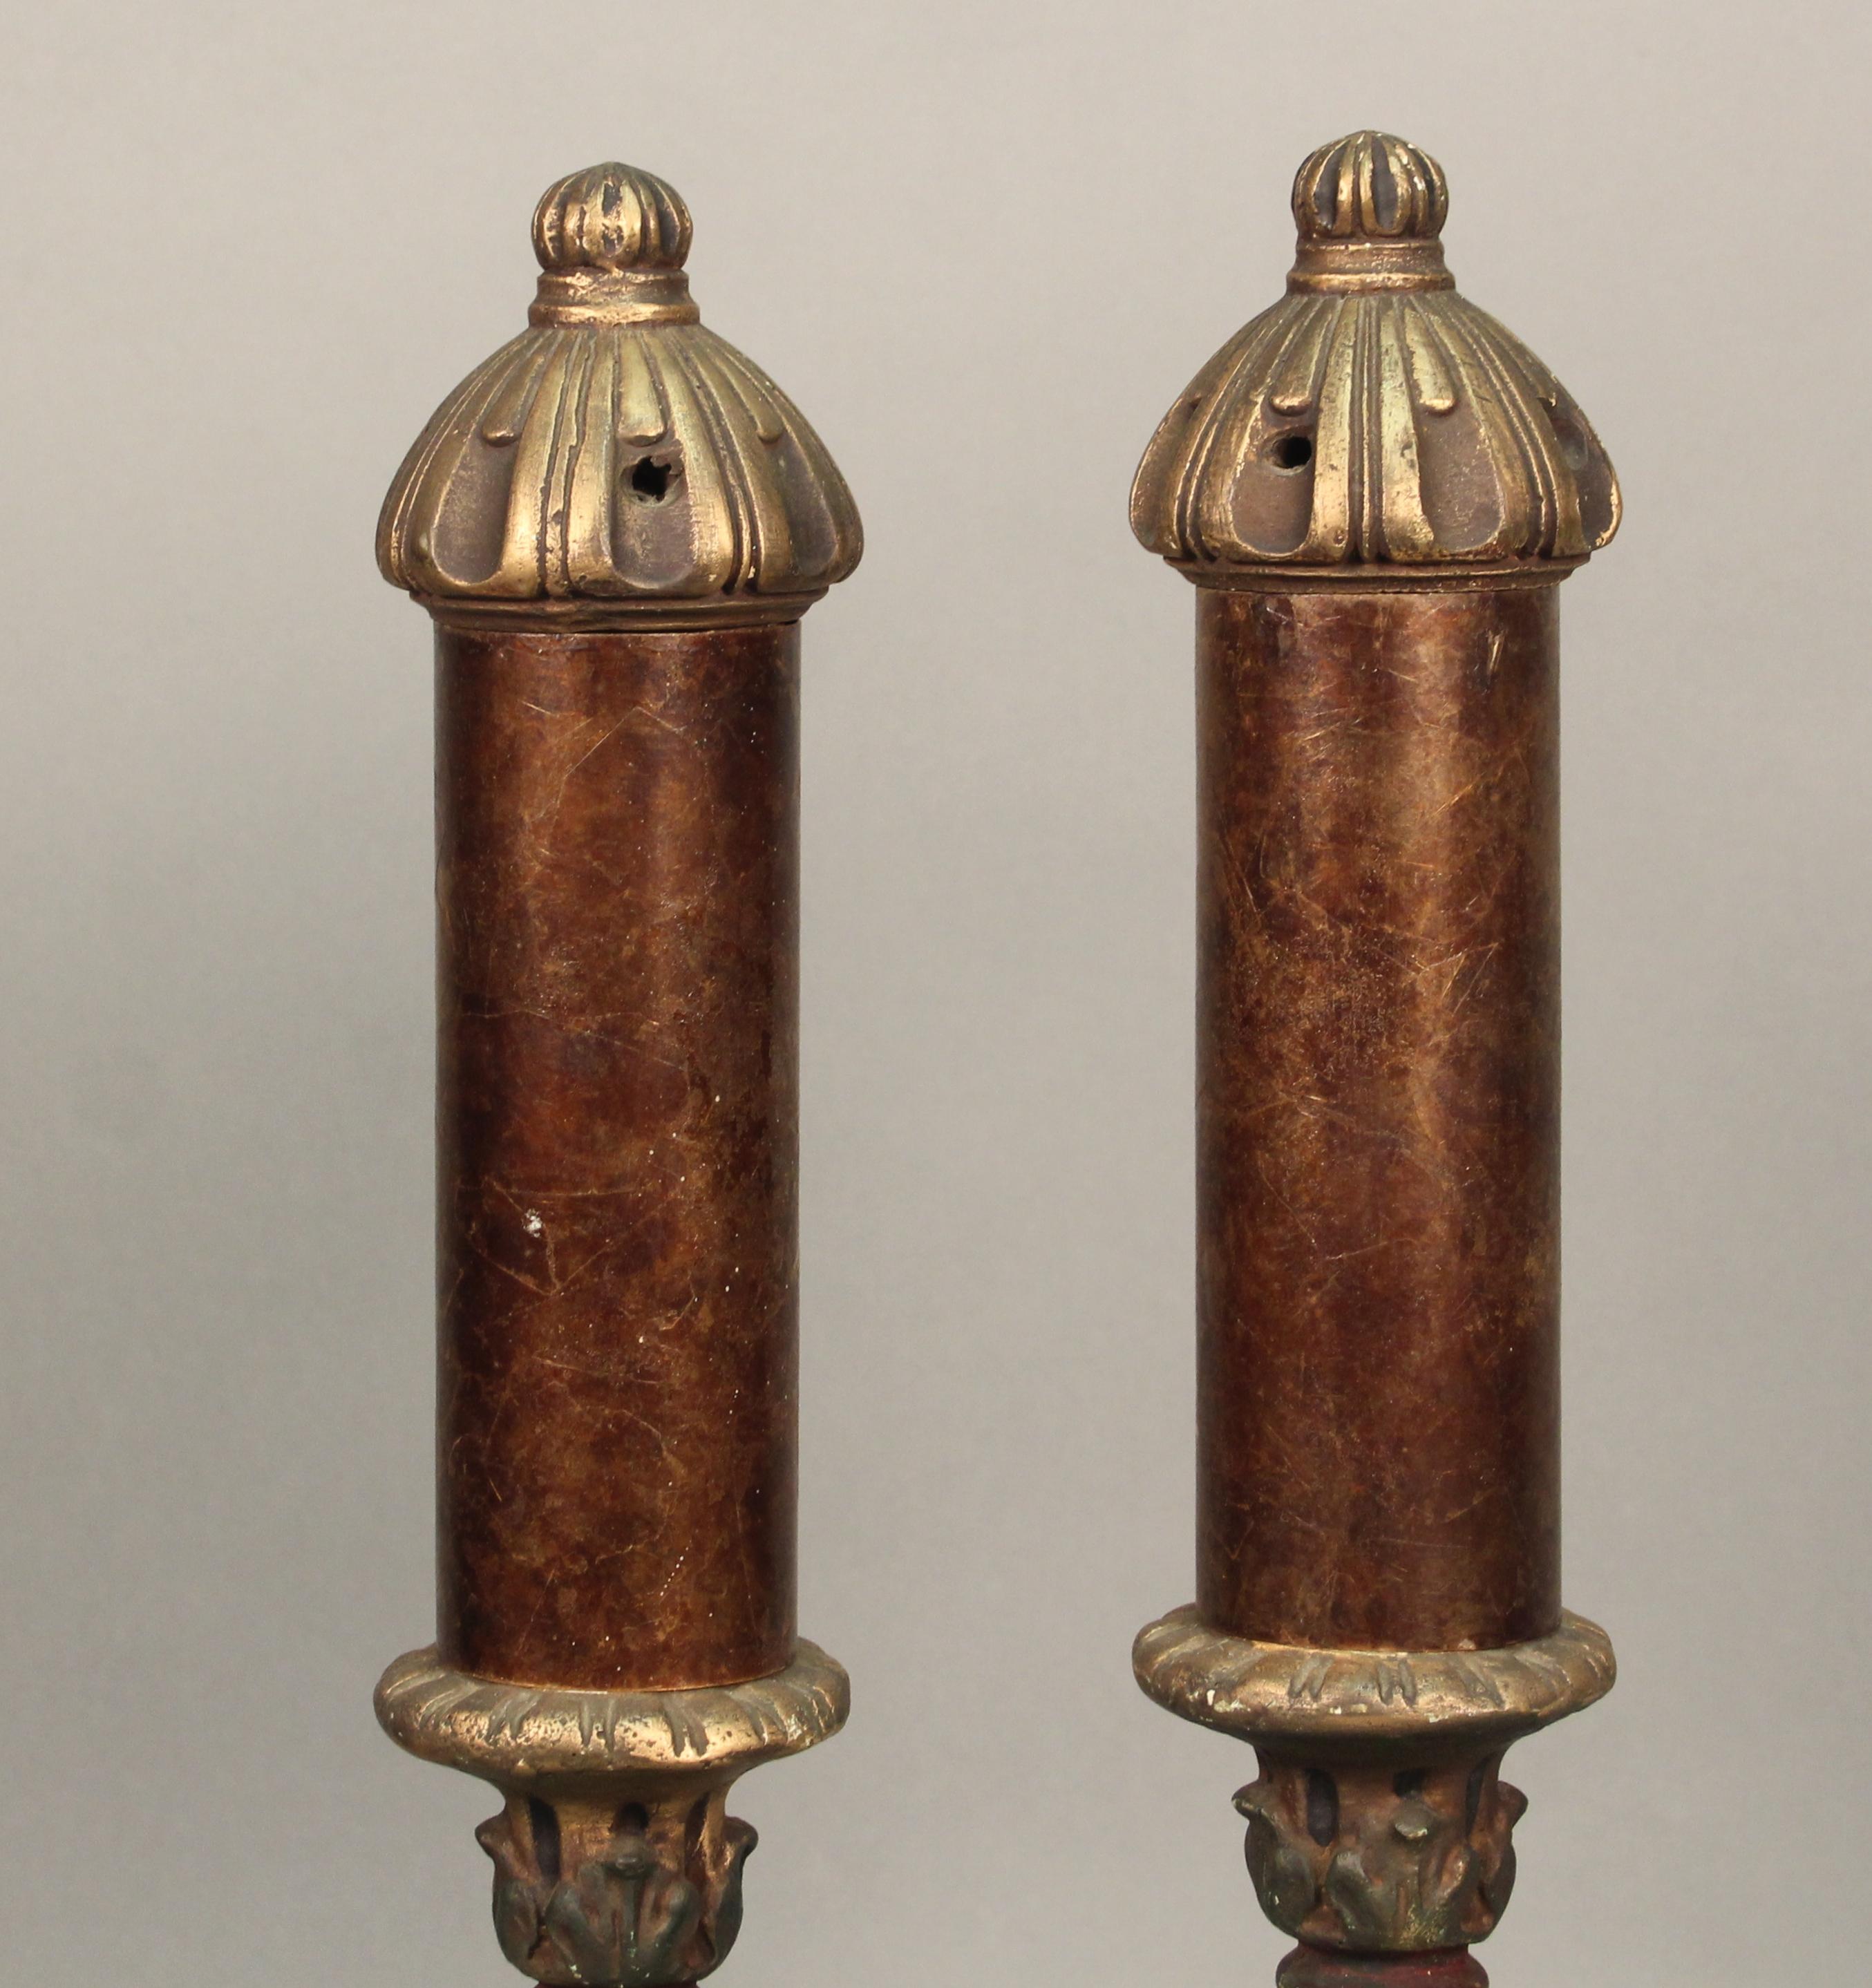 North American Pair of 1920s Polychrome Spanish Revival Mica Table Lamps